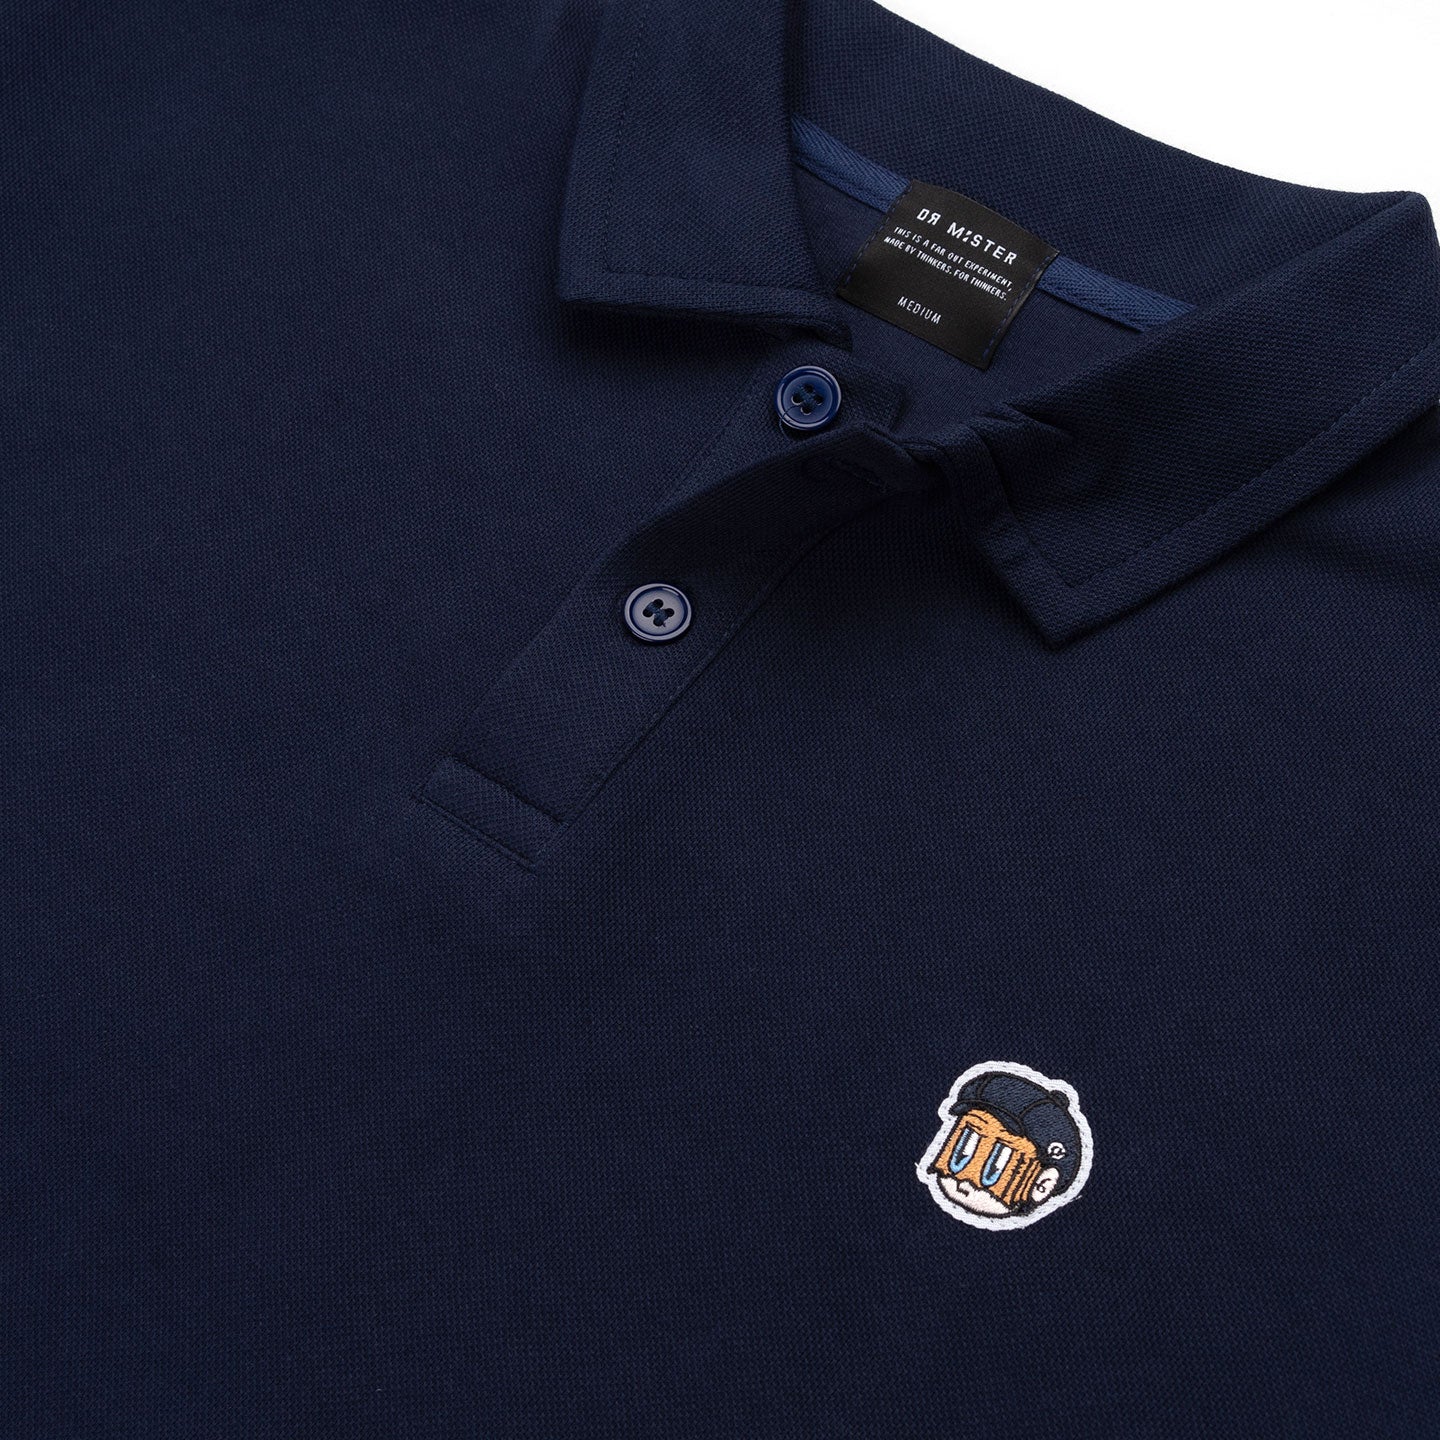 Patched Polo Tee - Navy Blue